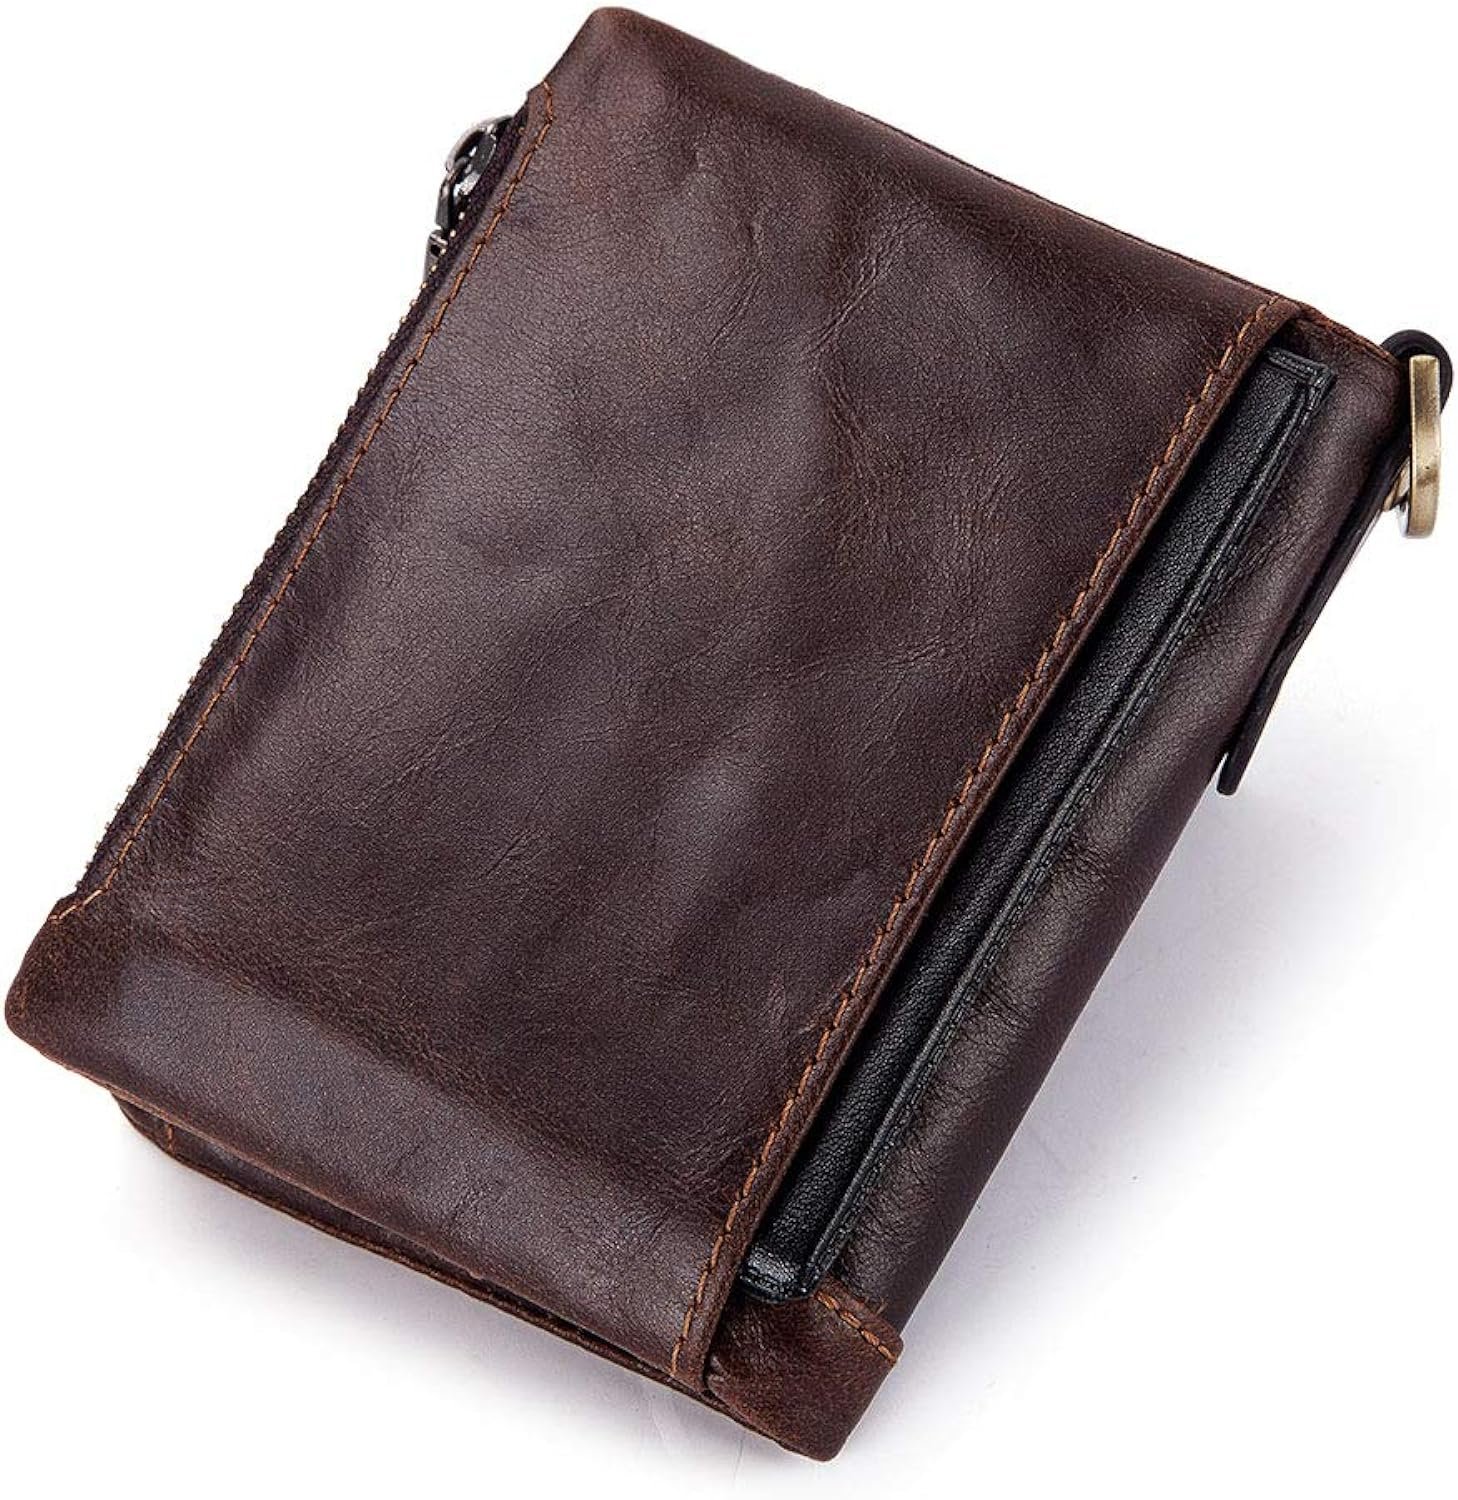 Boshiho Men’s Leather Trifold Wallet Review